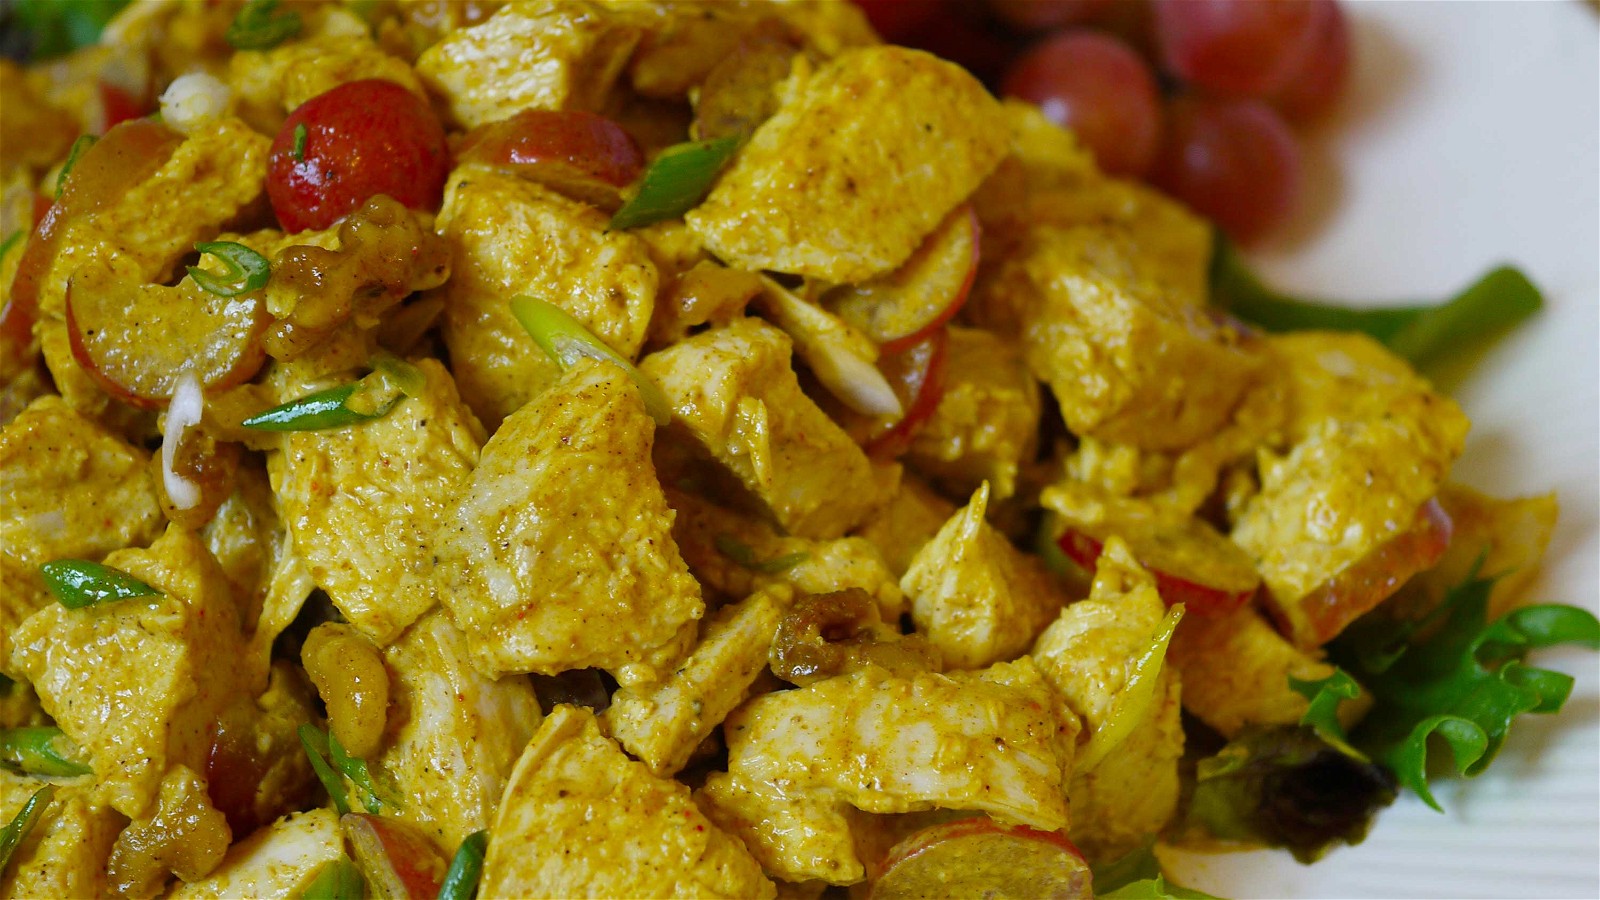 Image of Curry Chicken Salad with Grapes & Walnuts